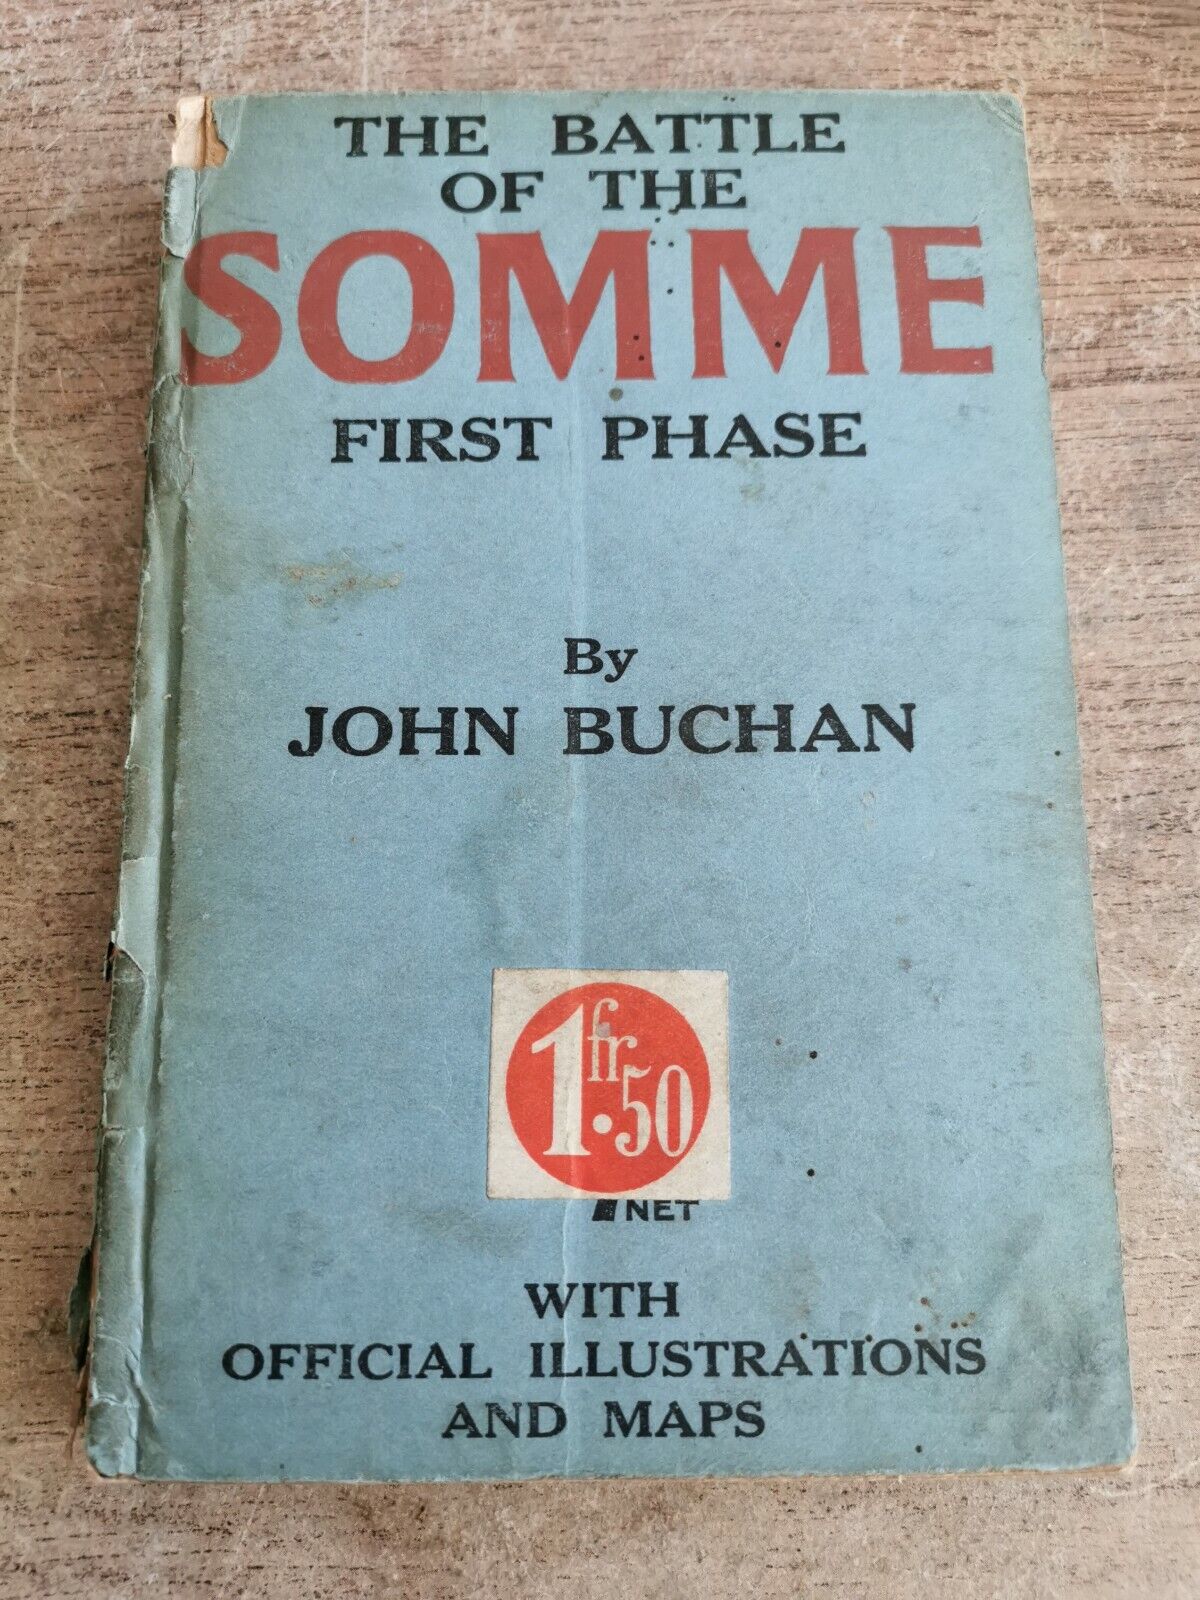 WW1 Period Book- The Battle of the Somme First Phase by John Buchan, Illustrated